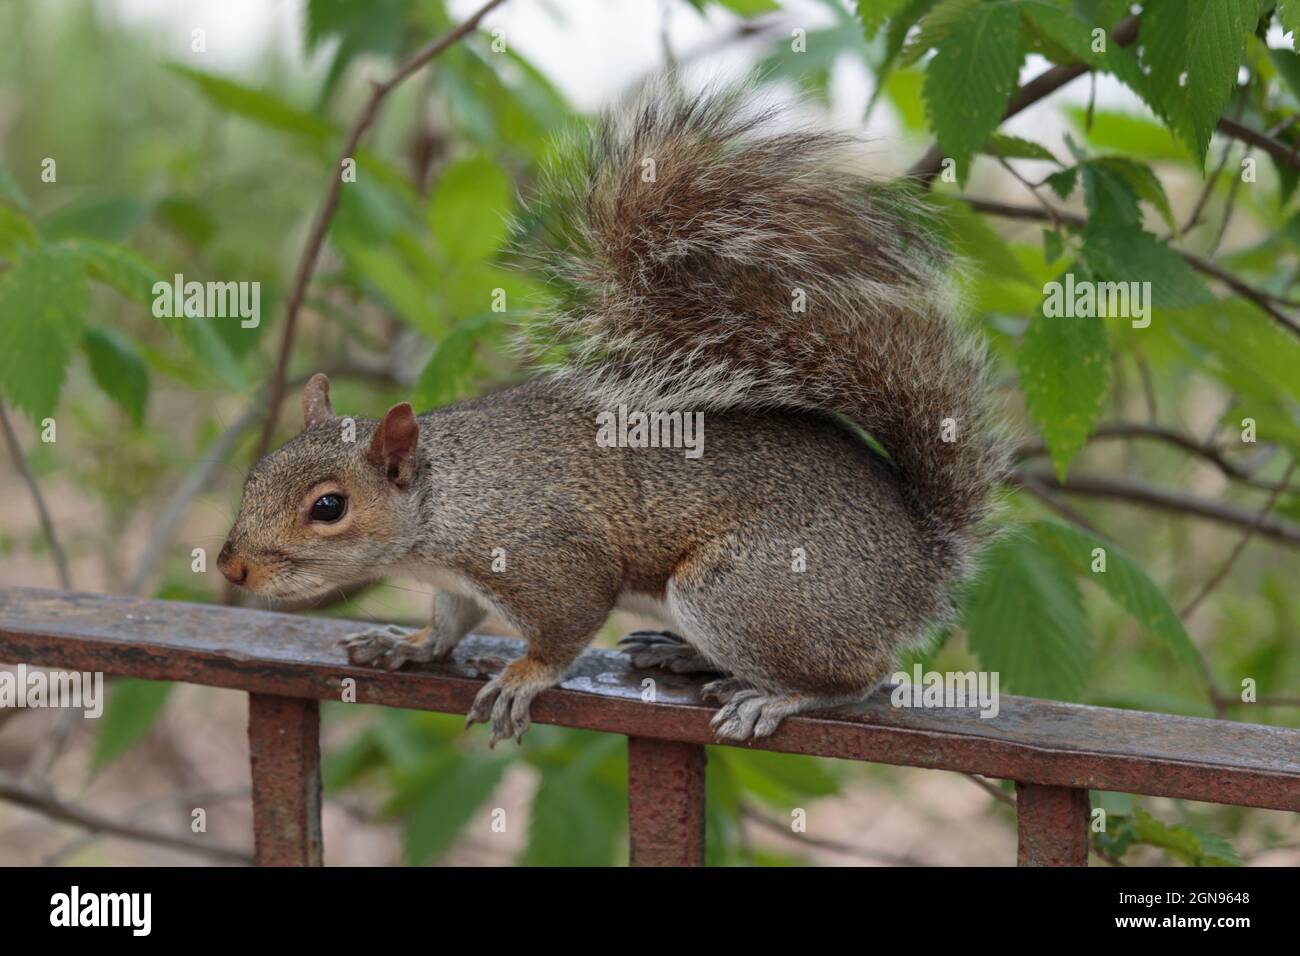 a gray squirrel sitting on top of a fence in early spring surrounded by foliage, example of urban wildlife or pests Stock Photo